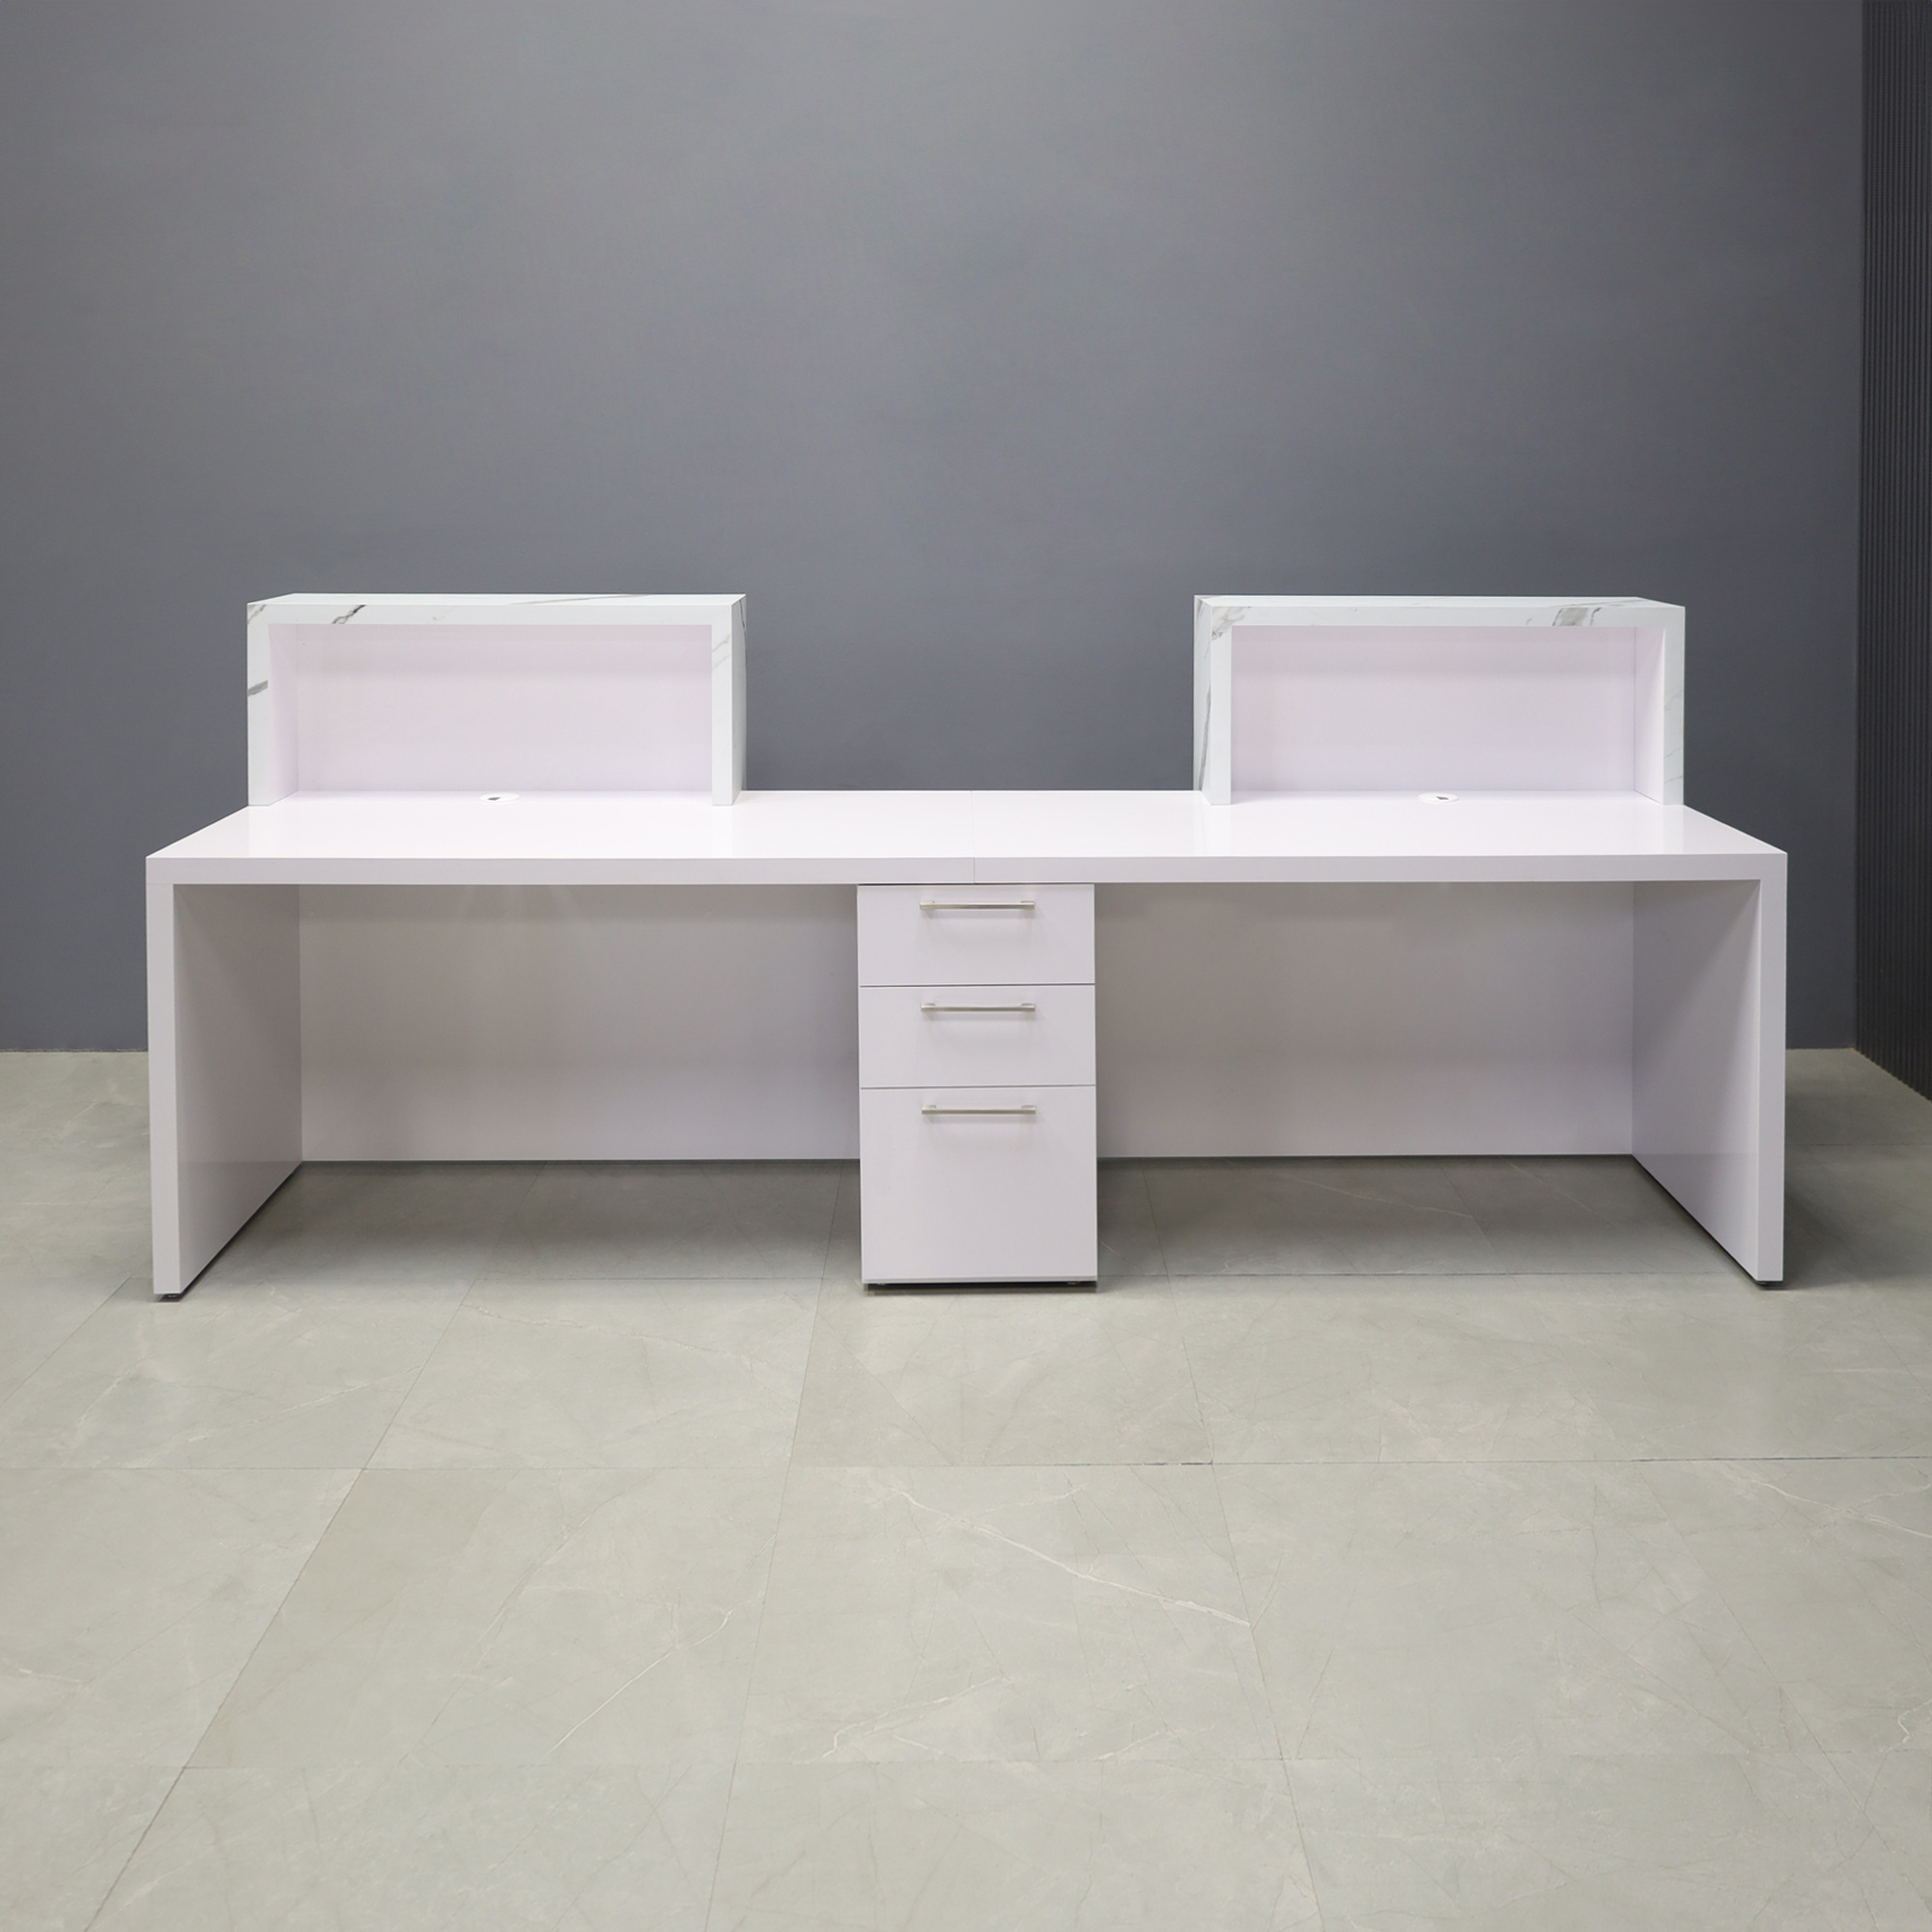 120-inch Los Angeles Double Counter Custom Reception Desk in calcutta stone PVC laminate counters and white matte laminate desks, with built-in storage, shown here.